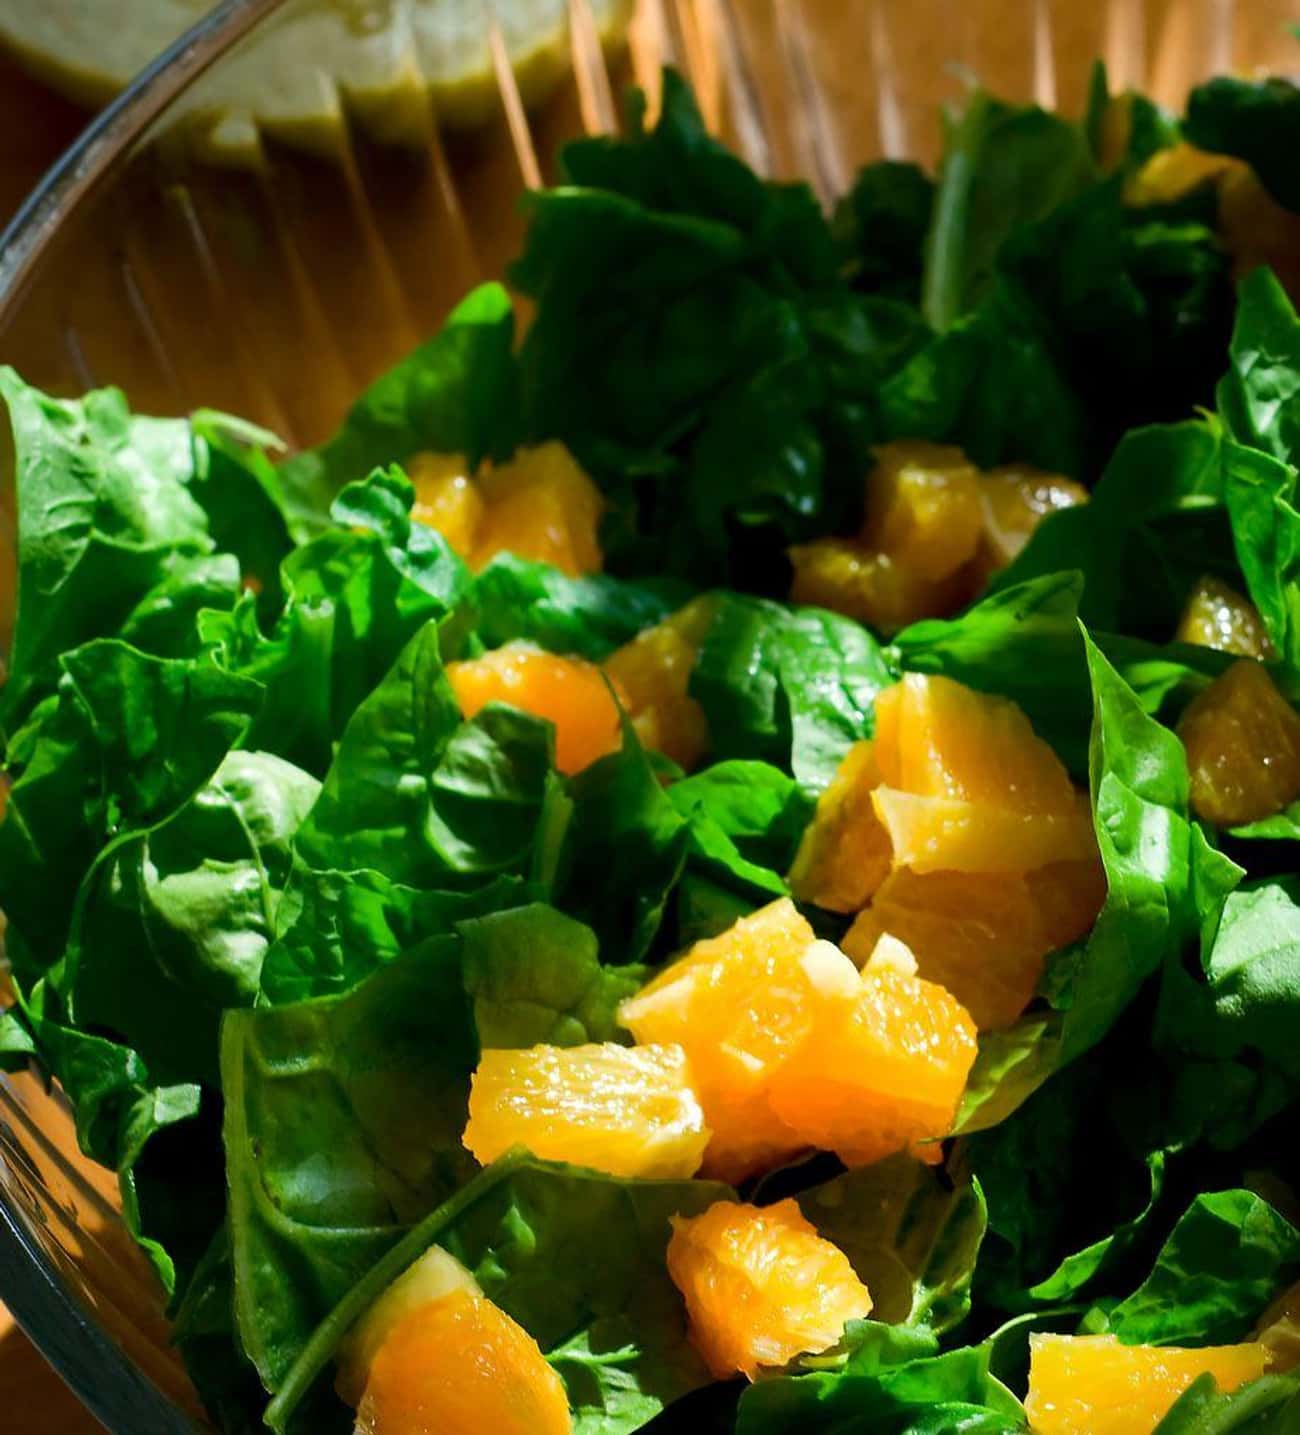 Some Food Combinations Help With Vitamin Absorption, But Juicing Can Compromise That